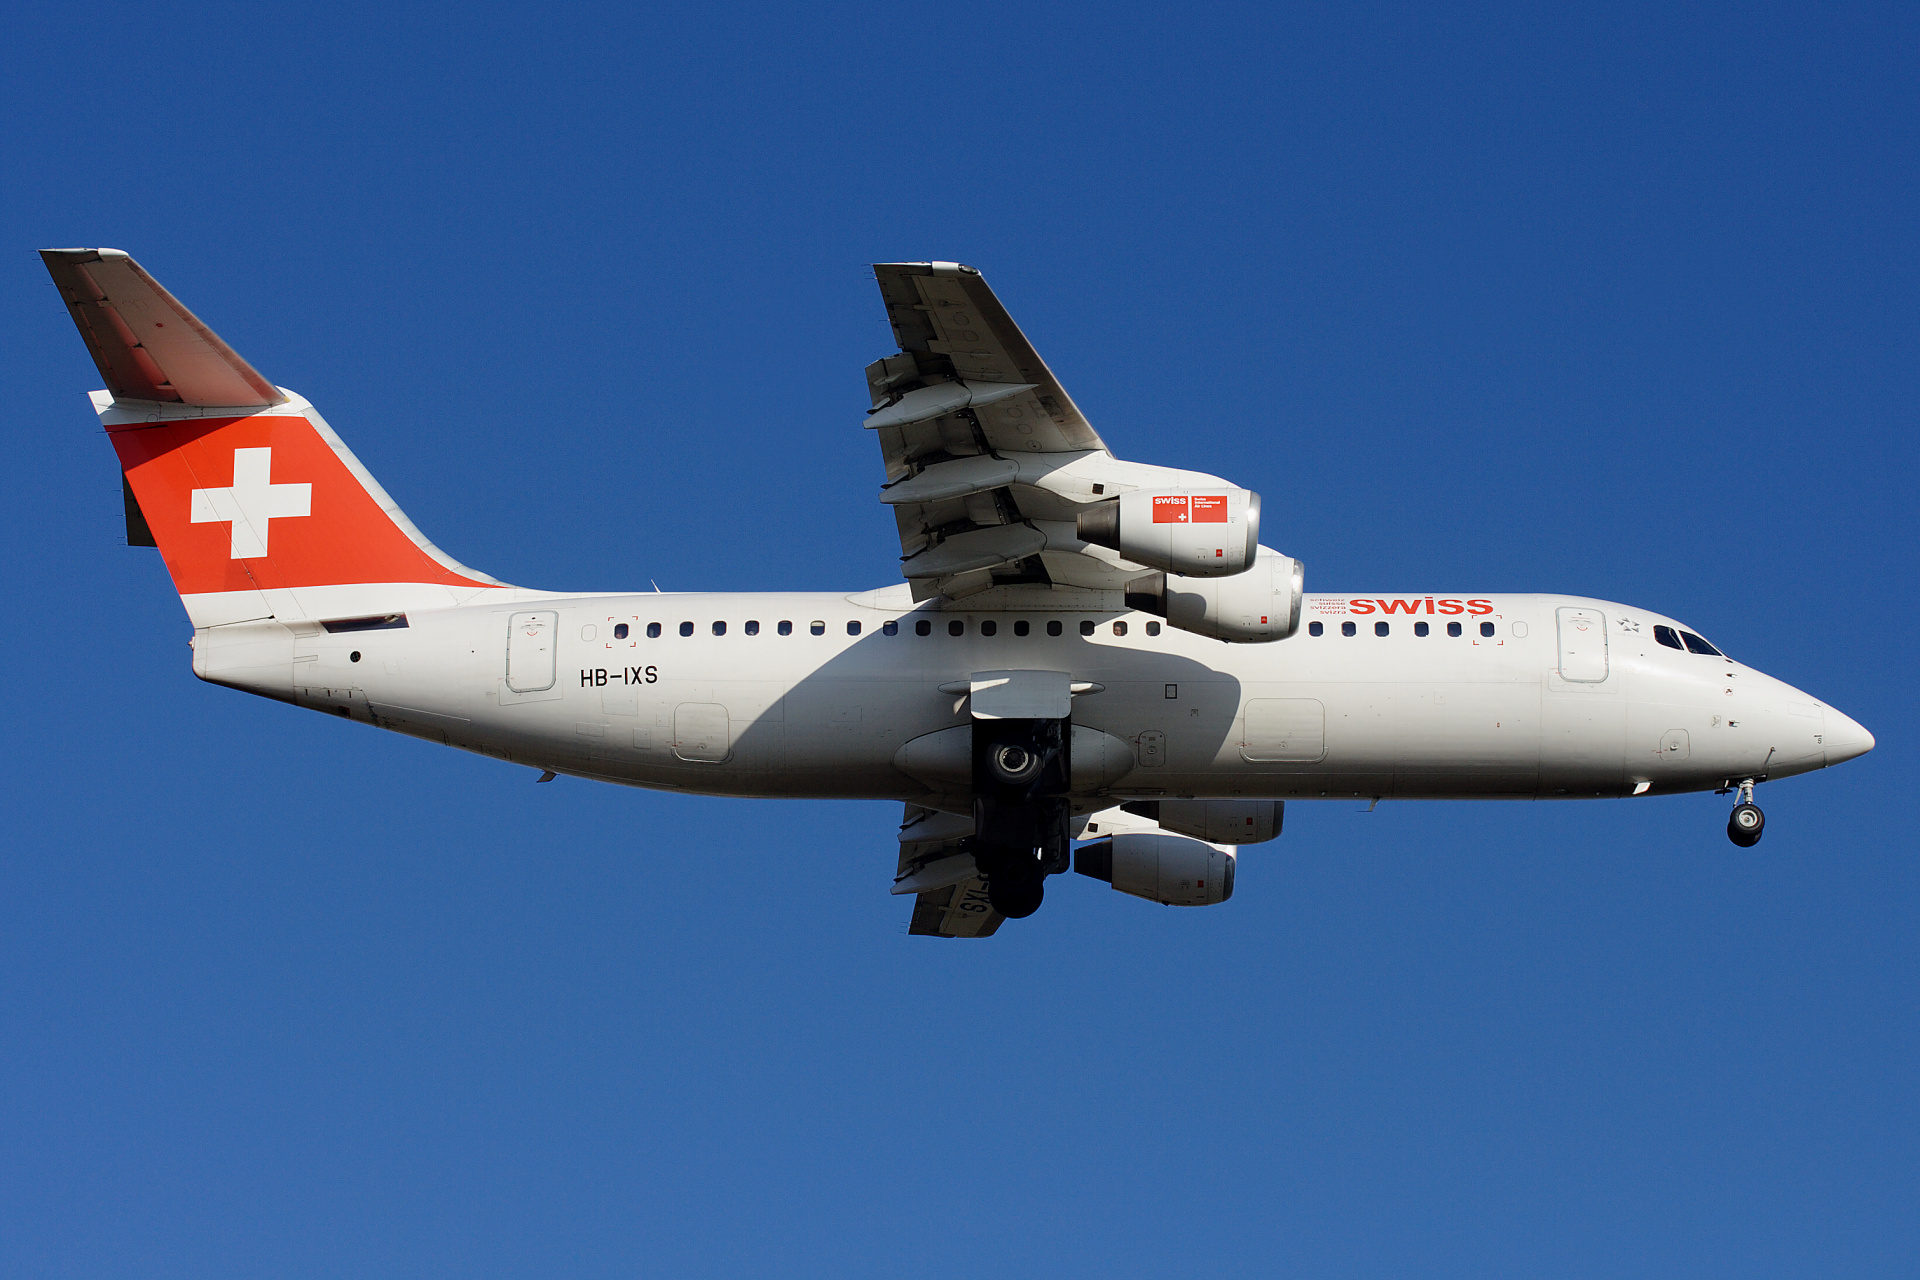 HB-IXS (Aircraft » EPWA Spotting » BAe 146 and revisions » Avro RJ100 » Swiss Global Air Lines)